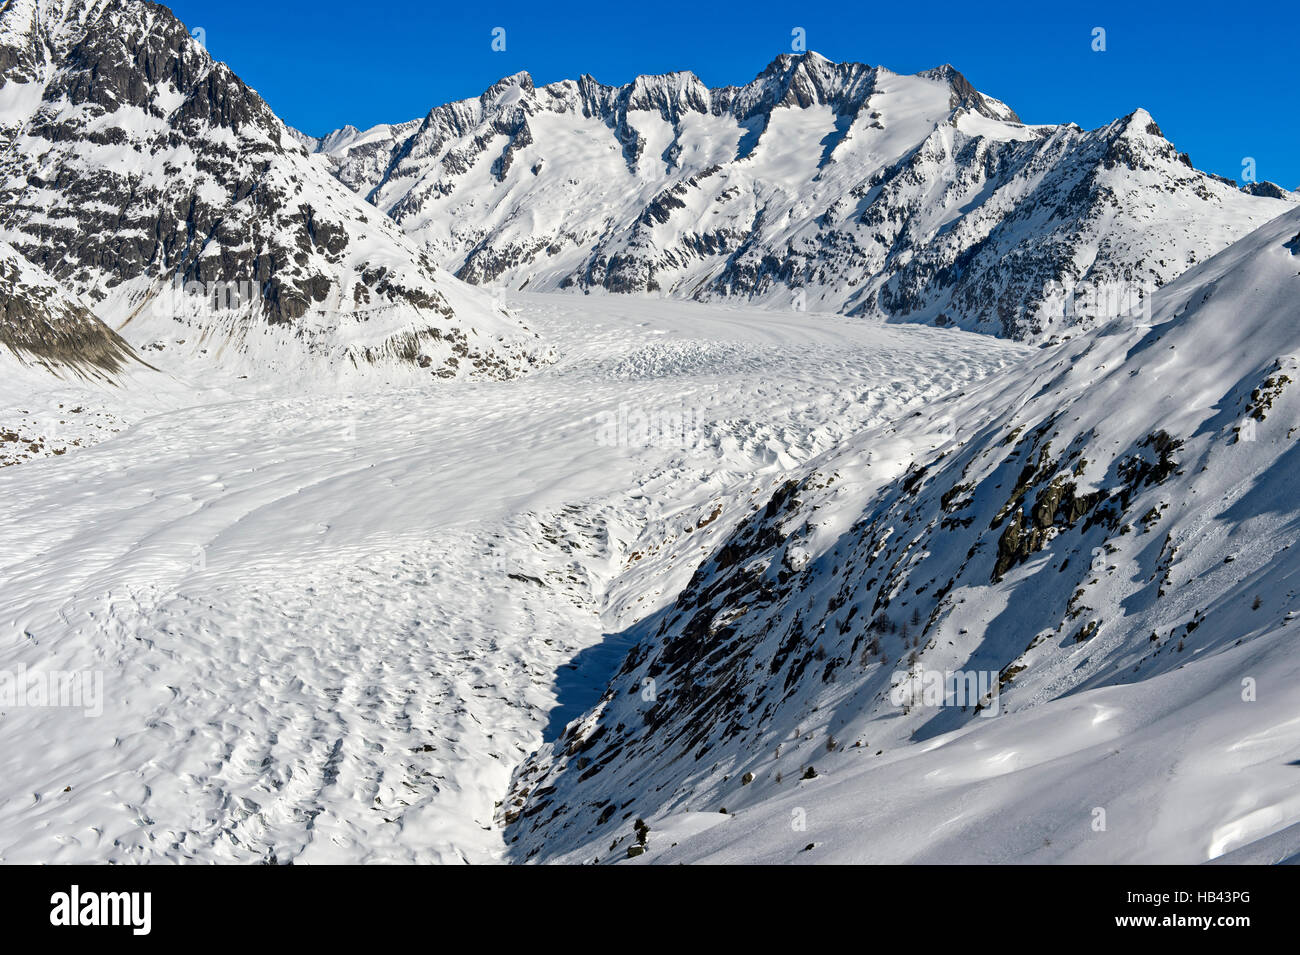 View across the snow-covered Great Aletsch Glacier, Aletsch arena Riederalp, Valais, Switzerland Stock Photo